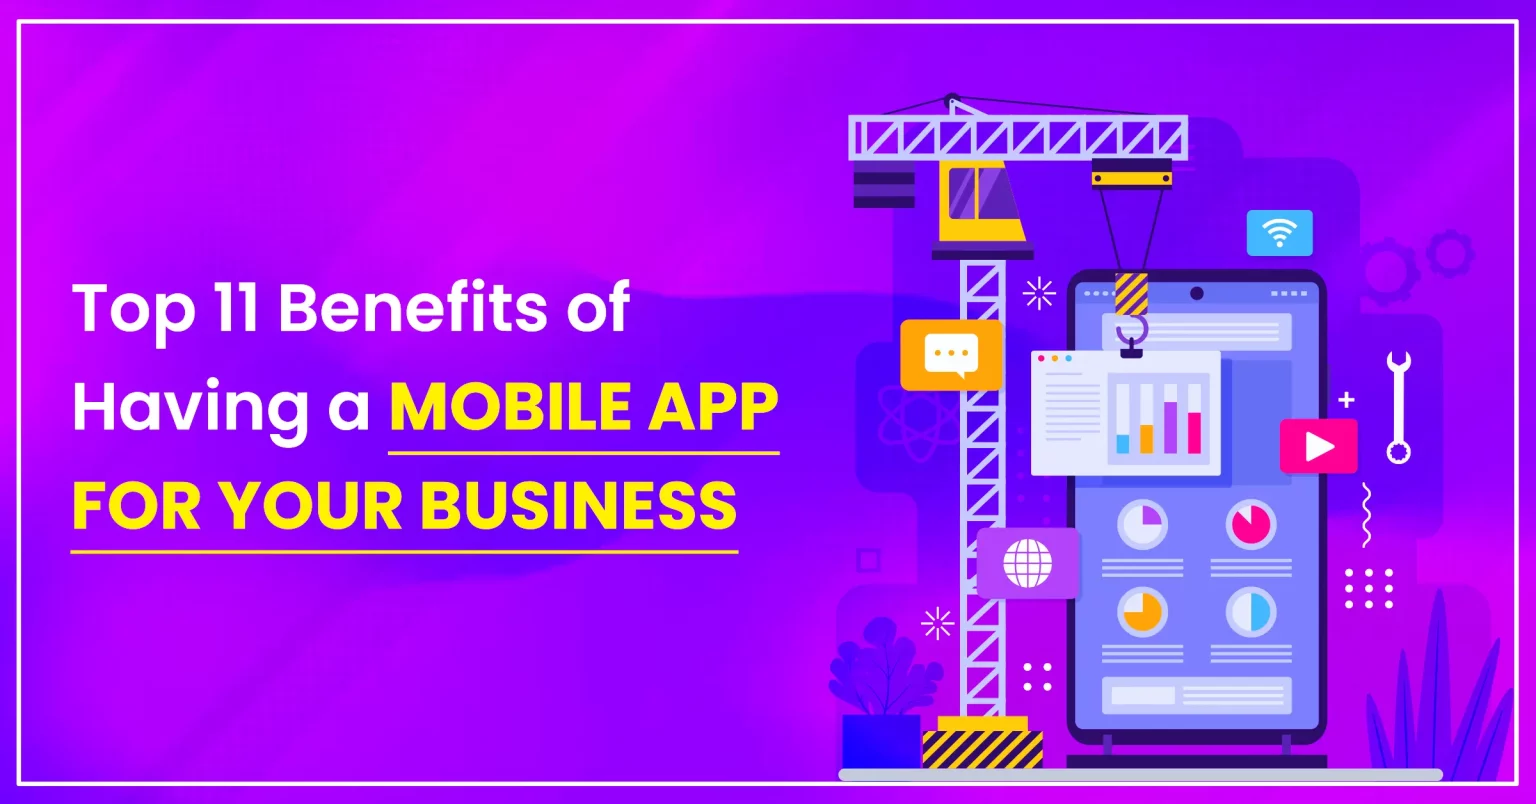 feature image for eiosys blog - Top 11 benefits of having a mobile app for your business